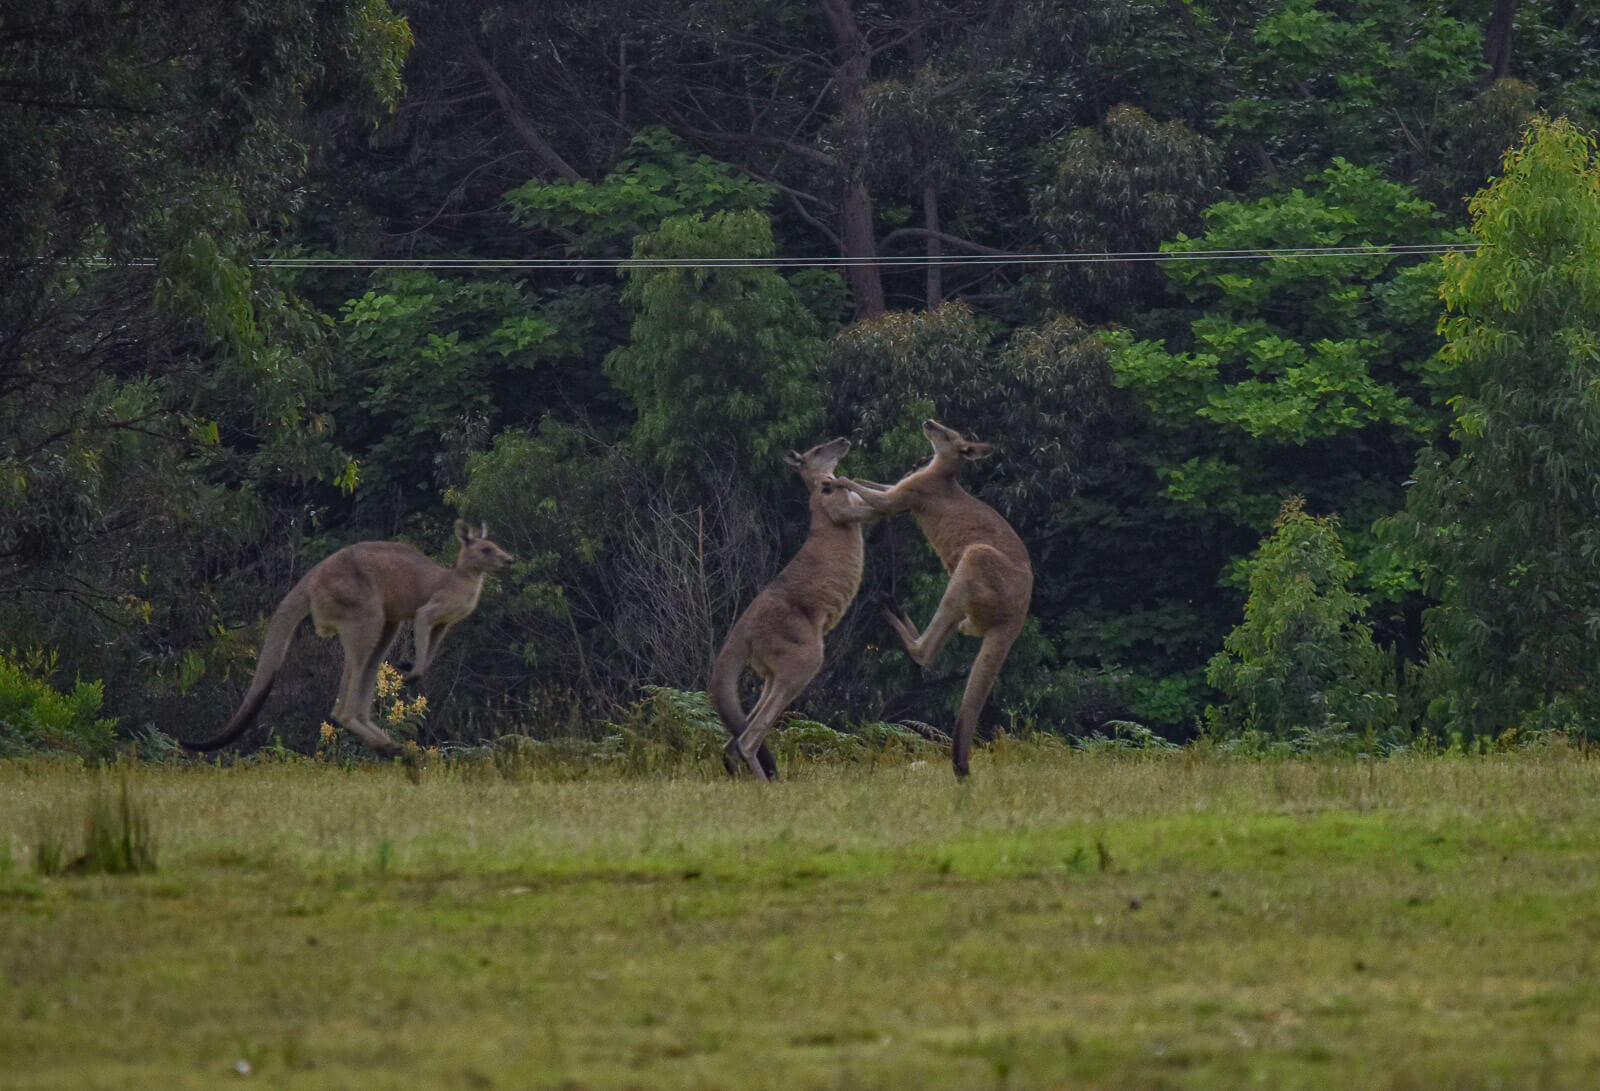 A kangaroo comes to join two kangaroos in a fight